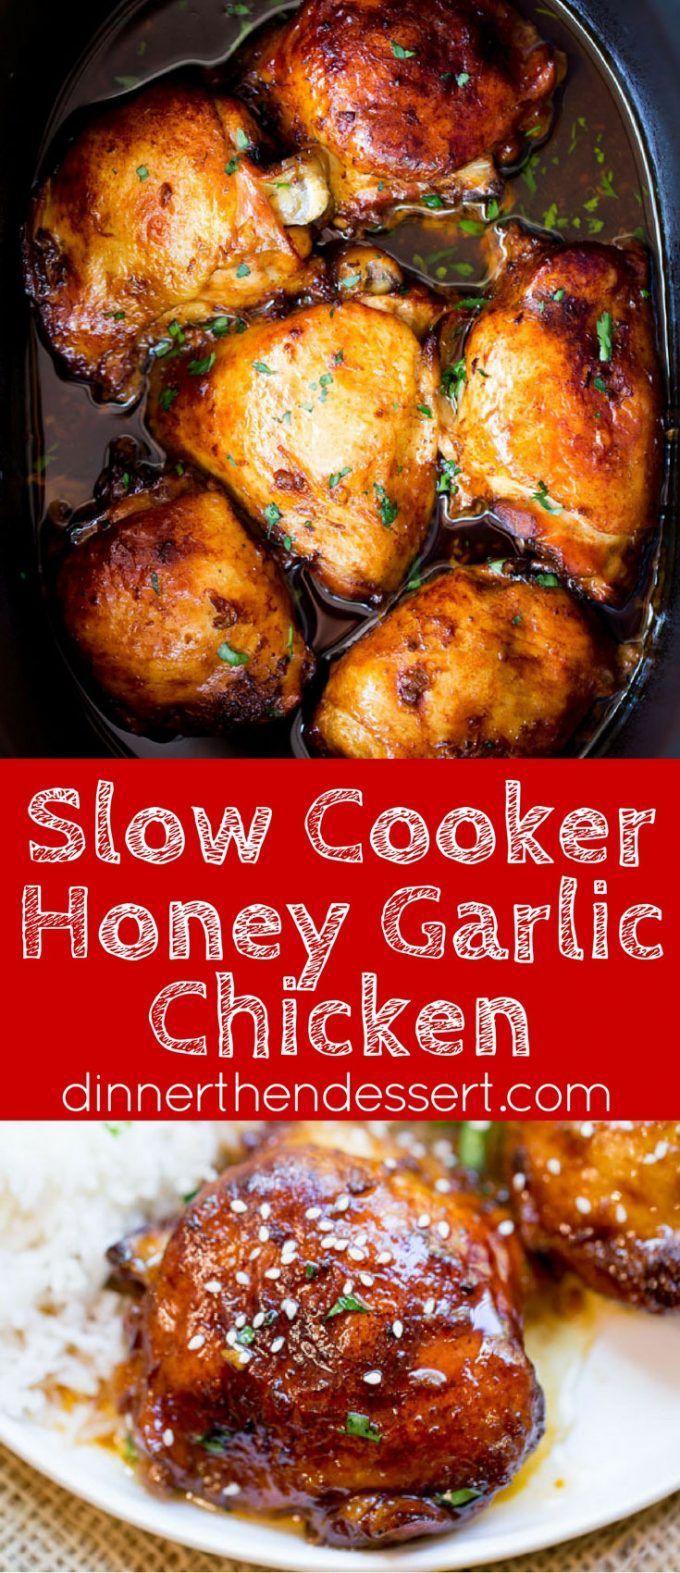 Slow Cooker Honey Garlic Chicken is the perfect weeknight meal with just five ingr